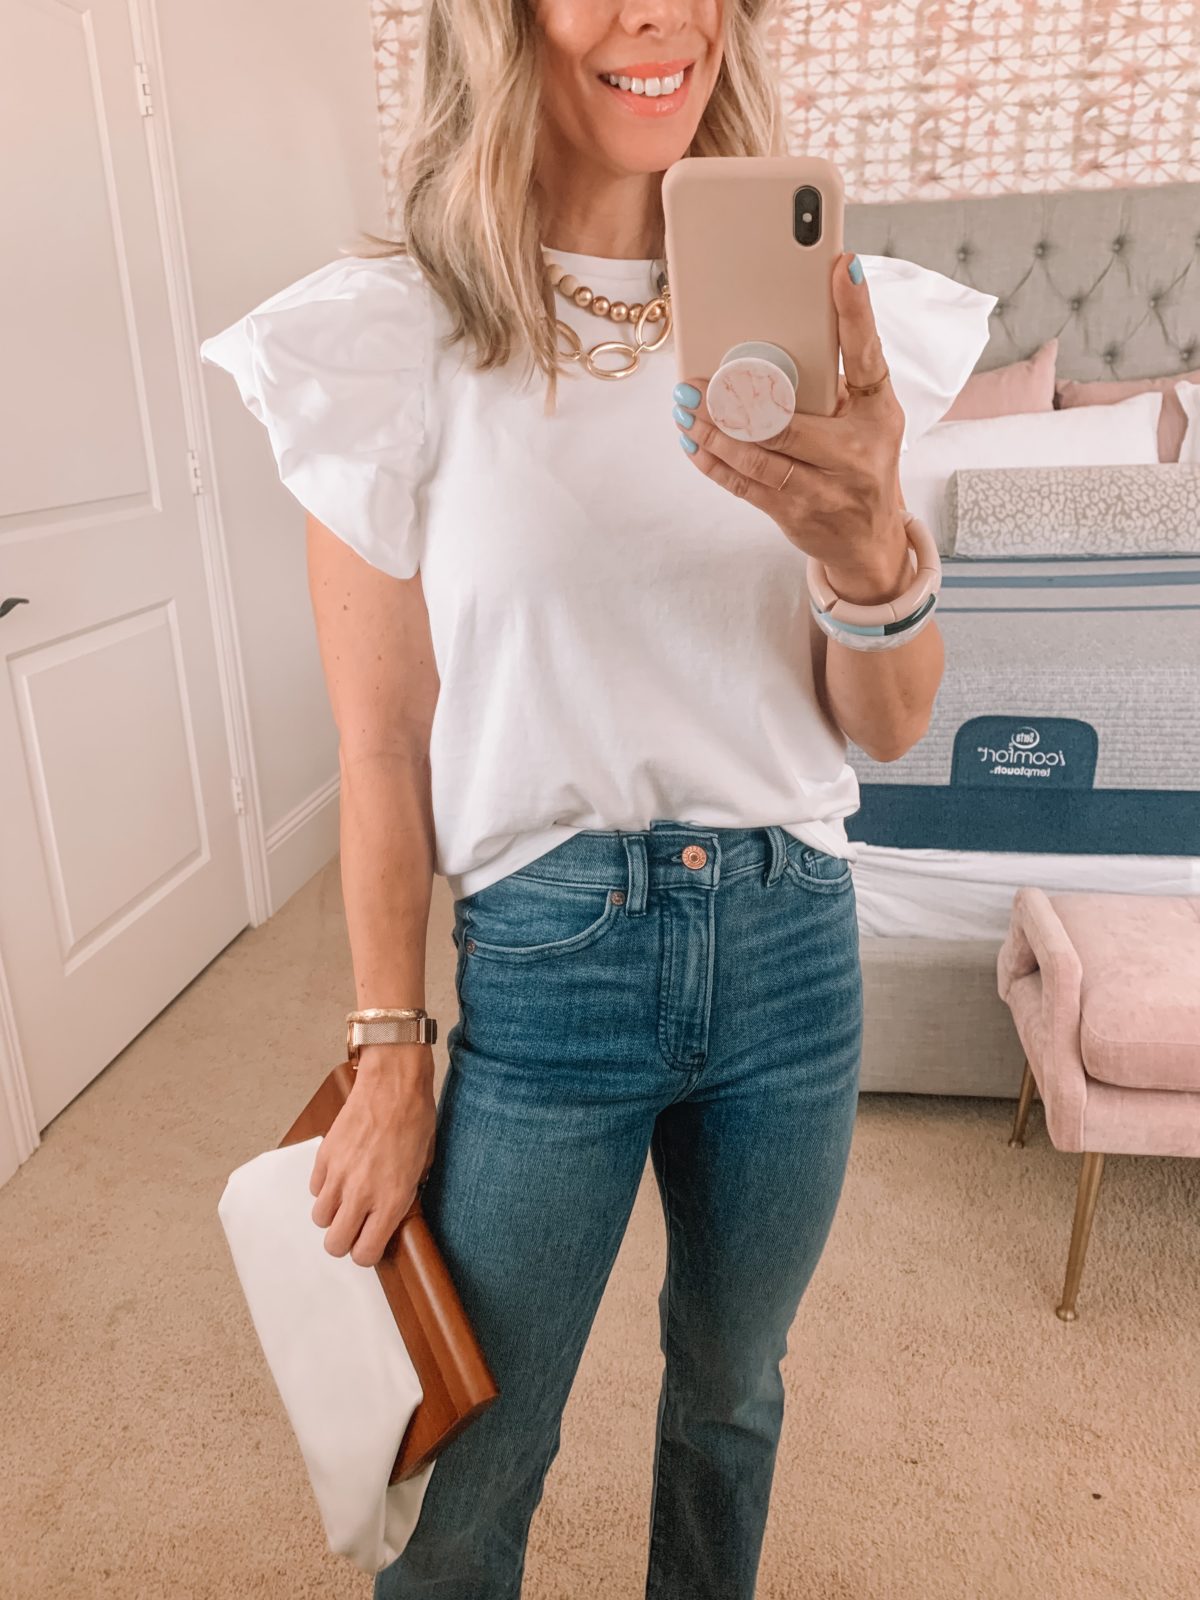 Dressing Room Finds, Express, Ruffle Sleeve Tee, Jeans, Sandals, clutch 